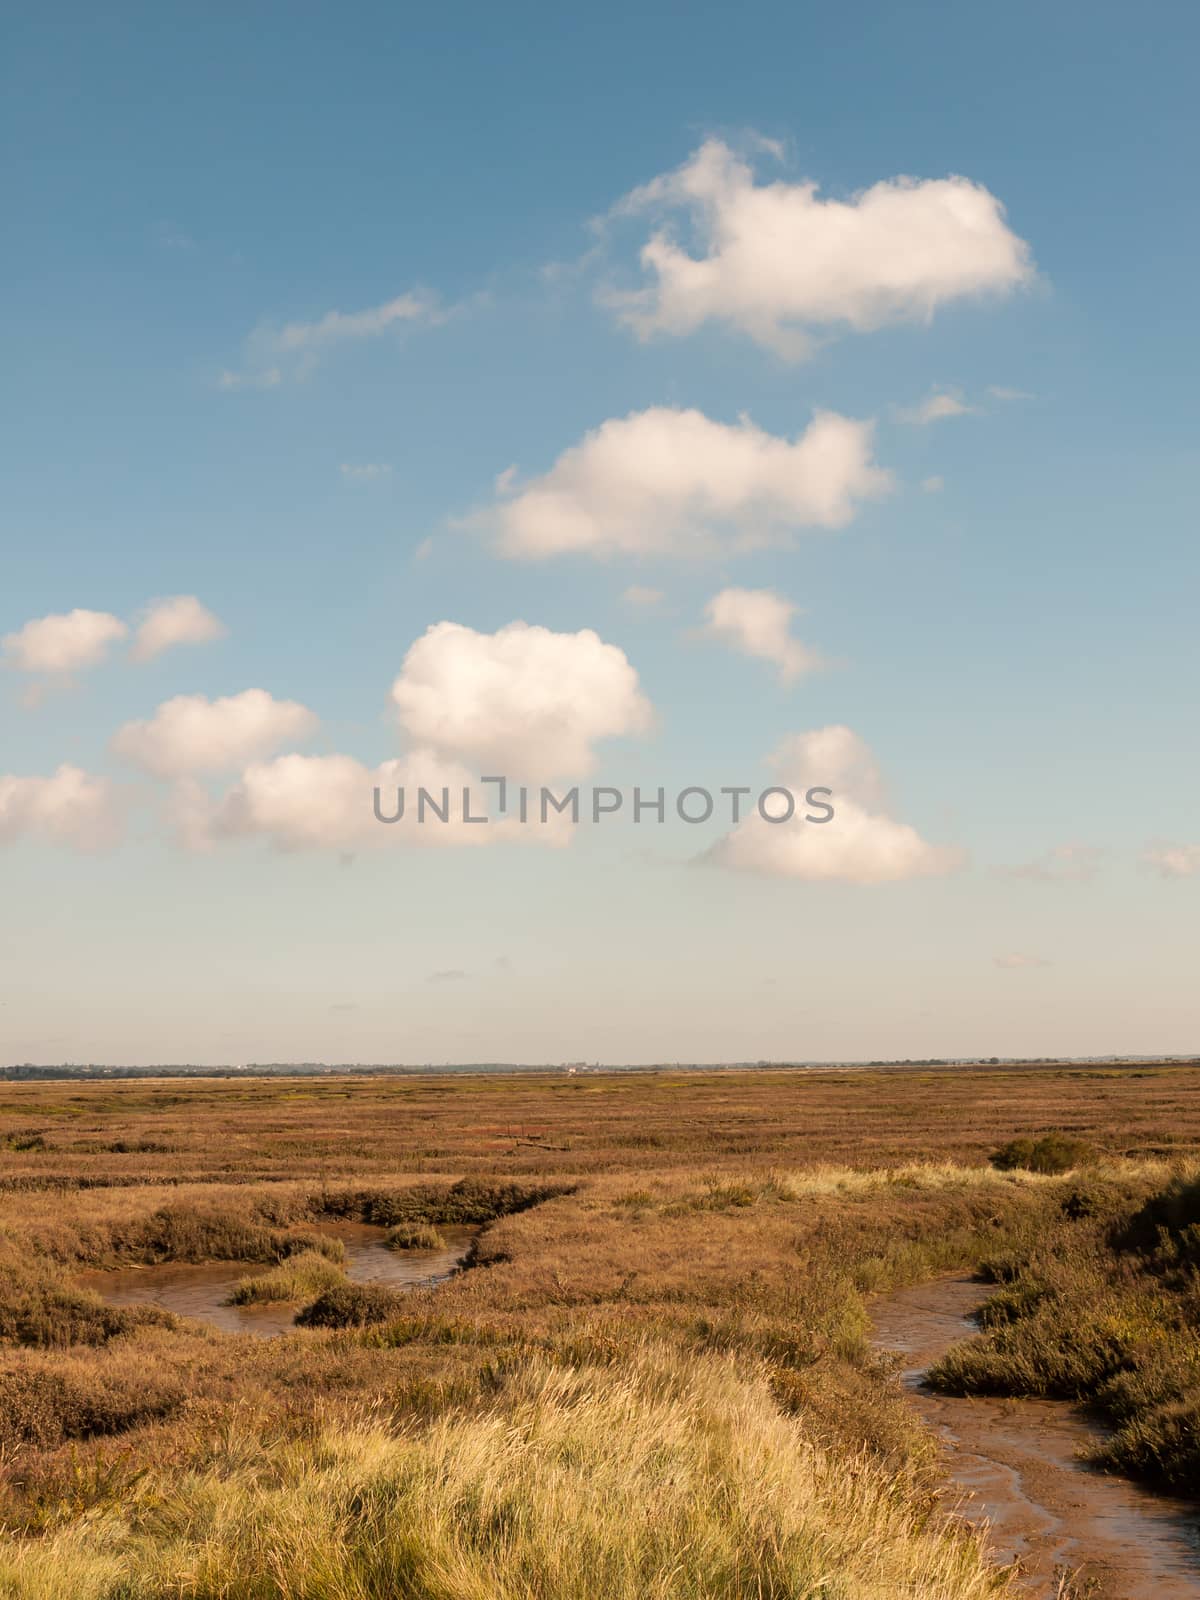 open marshland landscape scene with blue skies, clouds, and grass; essex; england; UK